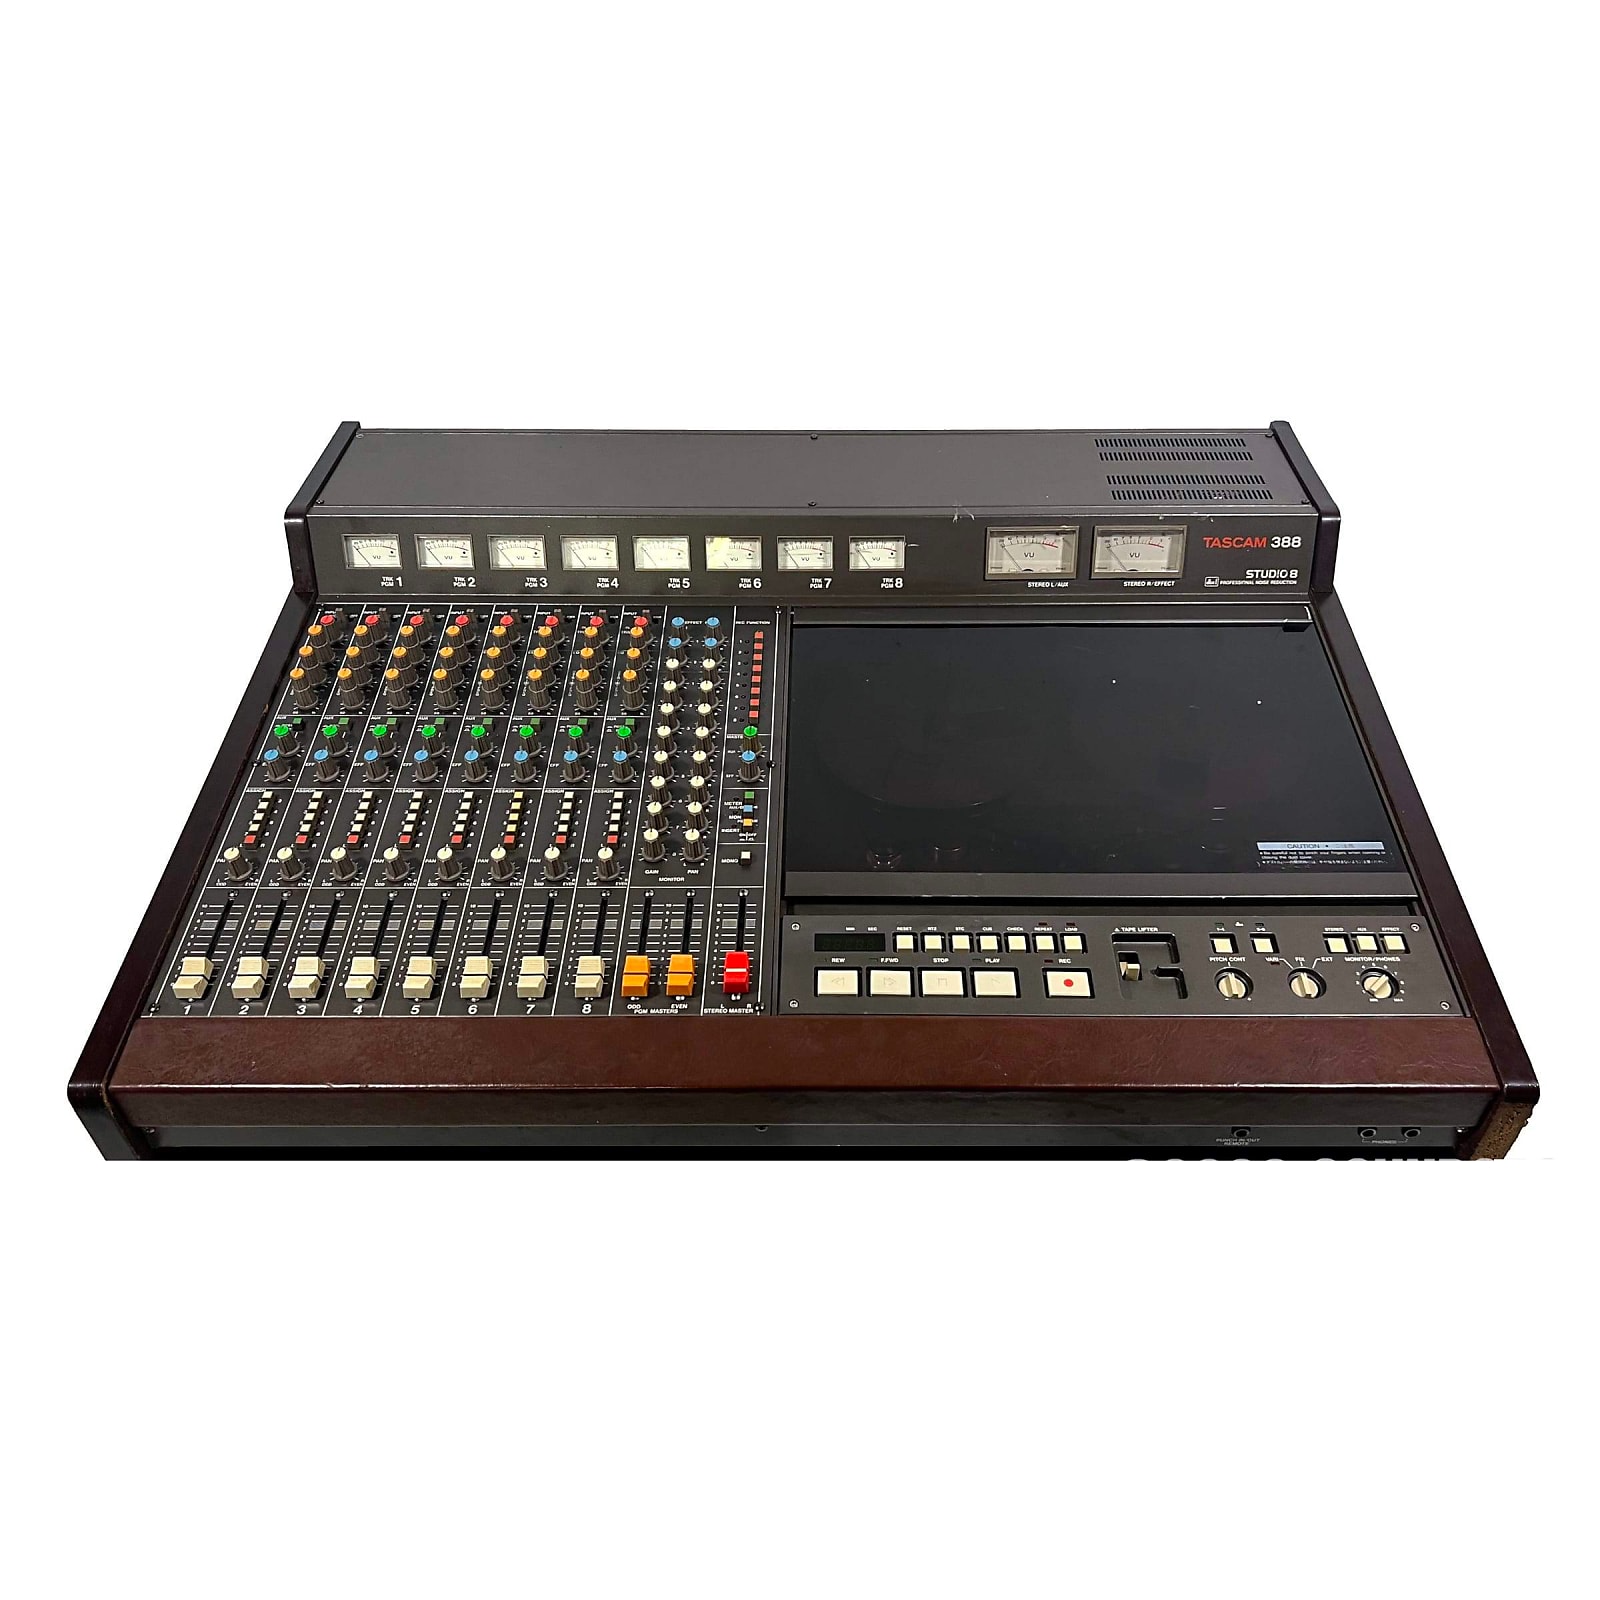 TASCAM 388 8-Channel Mixer with 1/4 8-Track Reel to Reel Recorder | Reverb